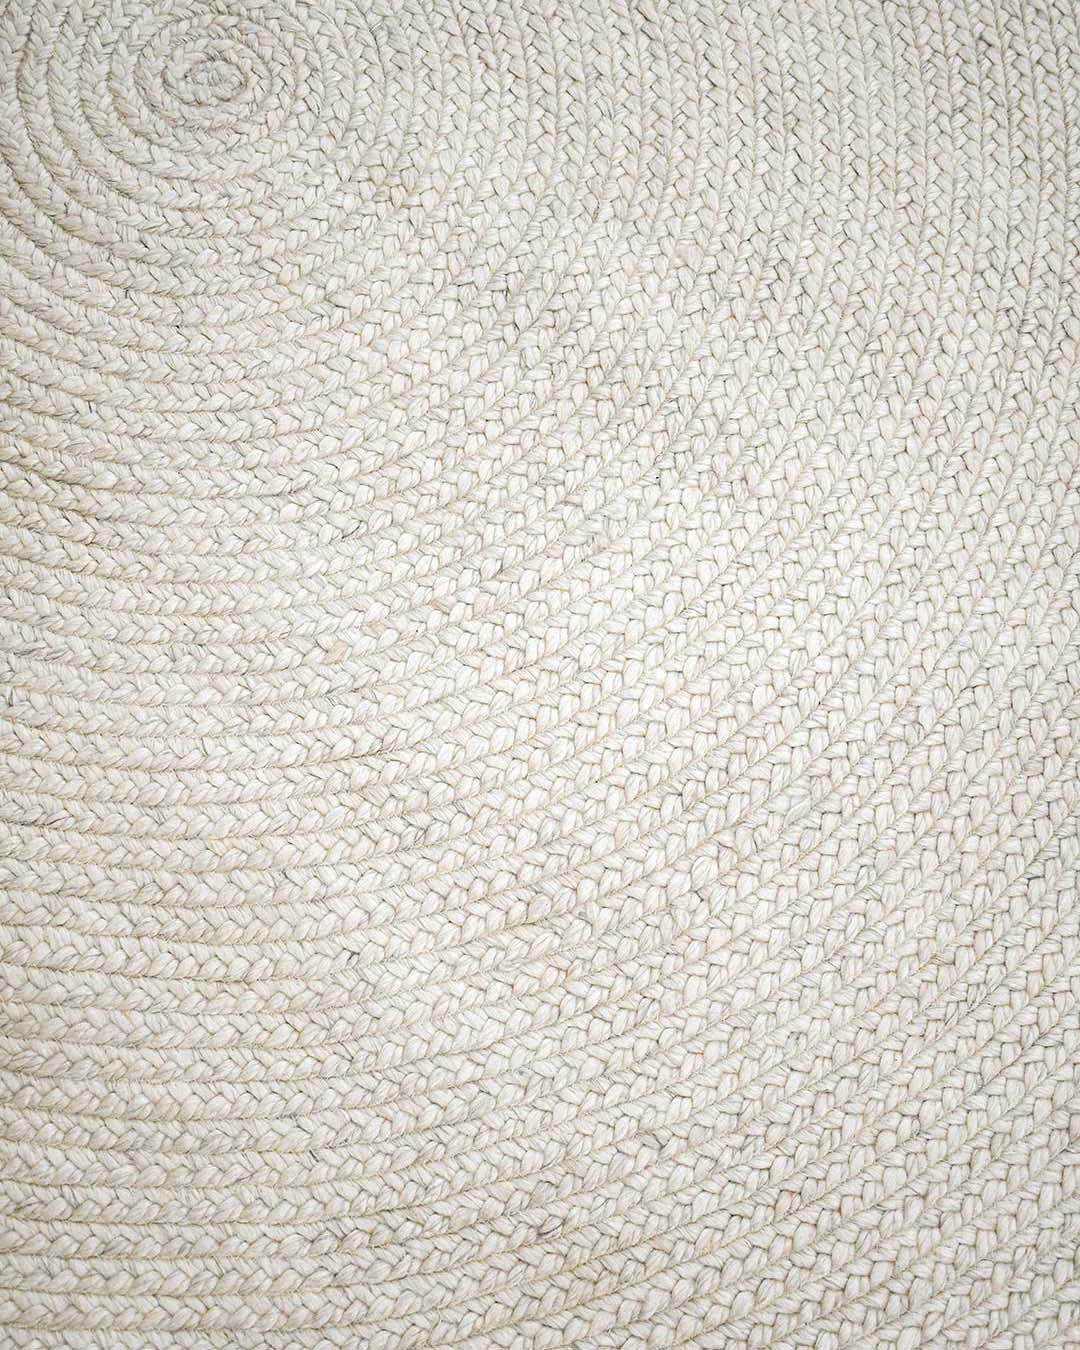 Close up view of Glenmore round rug in white colour